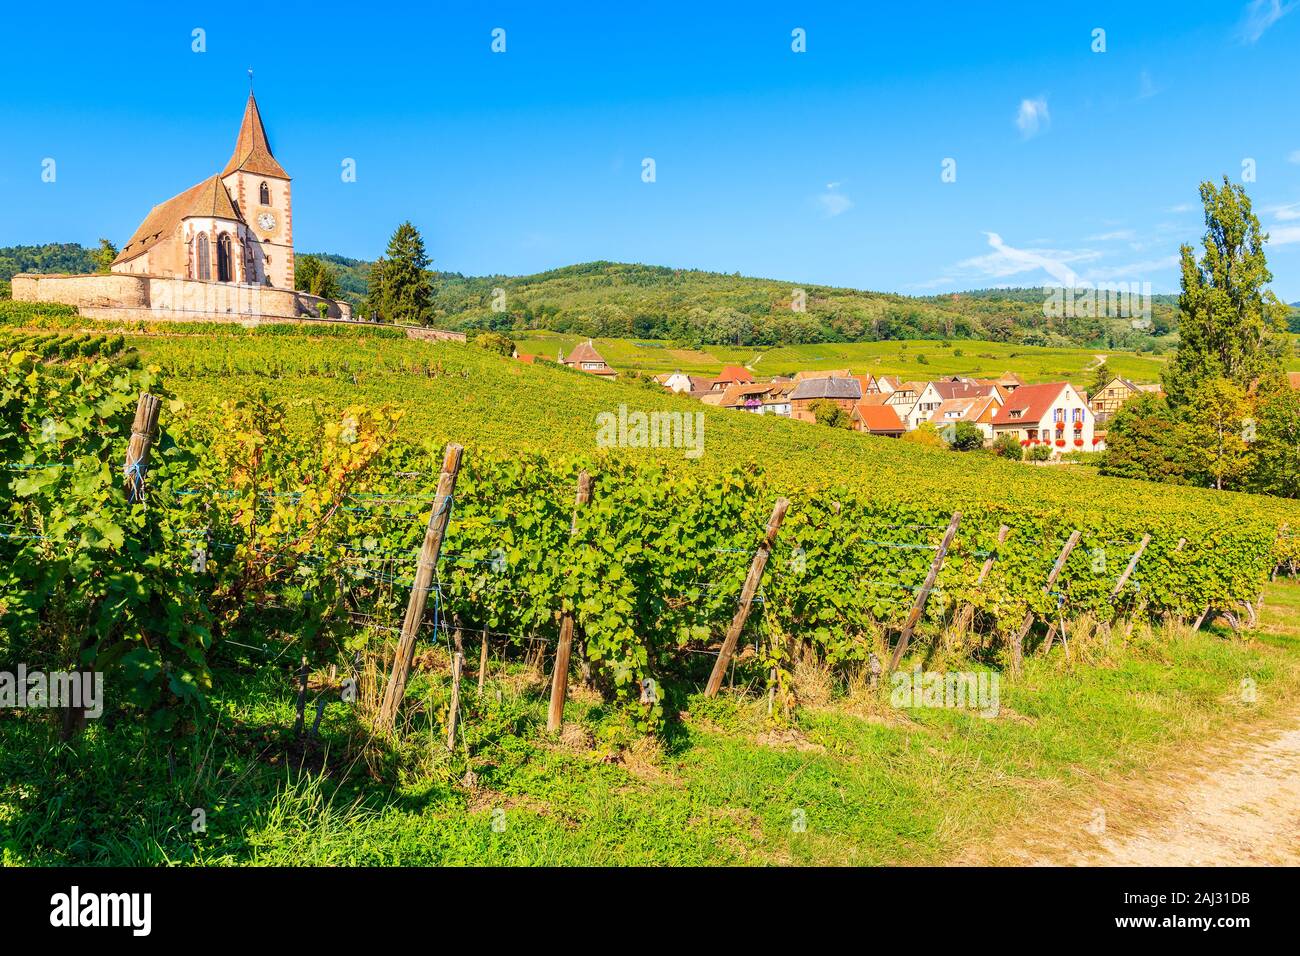 Picturesque church in vineyards in famous Hunawihr village, Alsace Wine Route, France Stock Photo